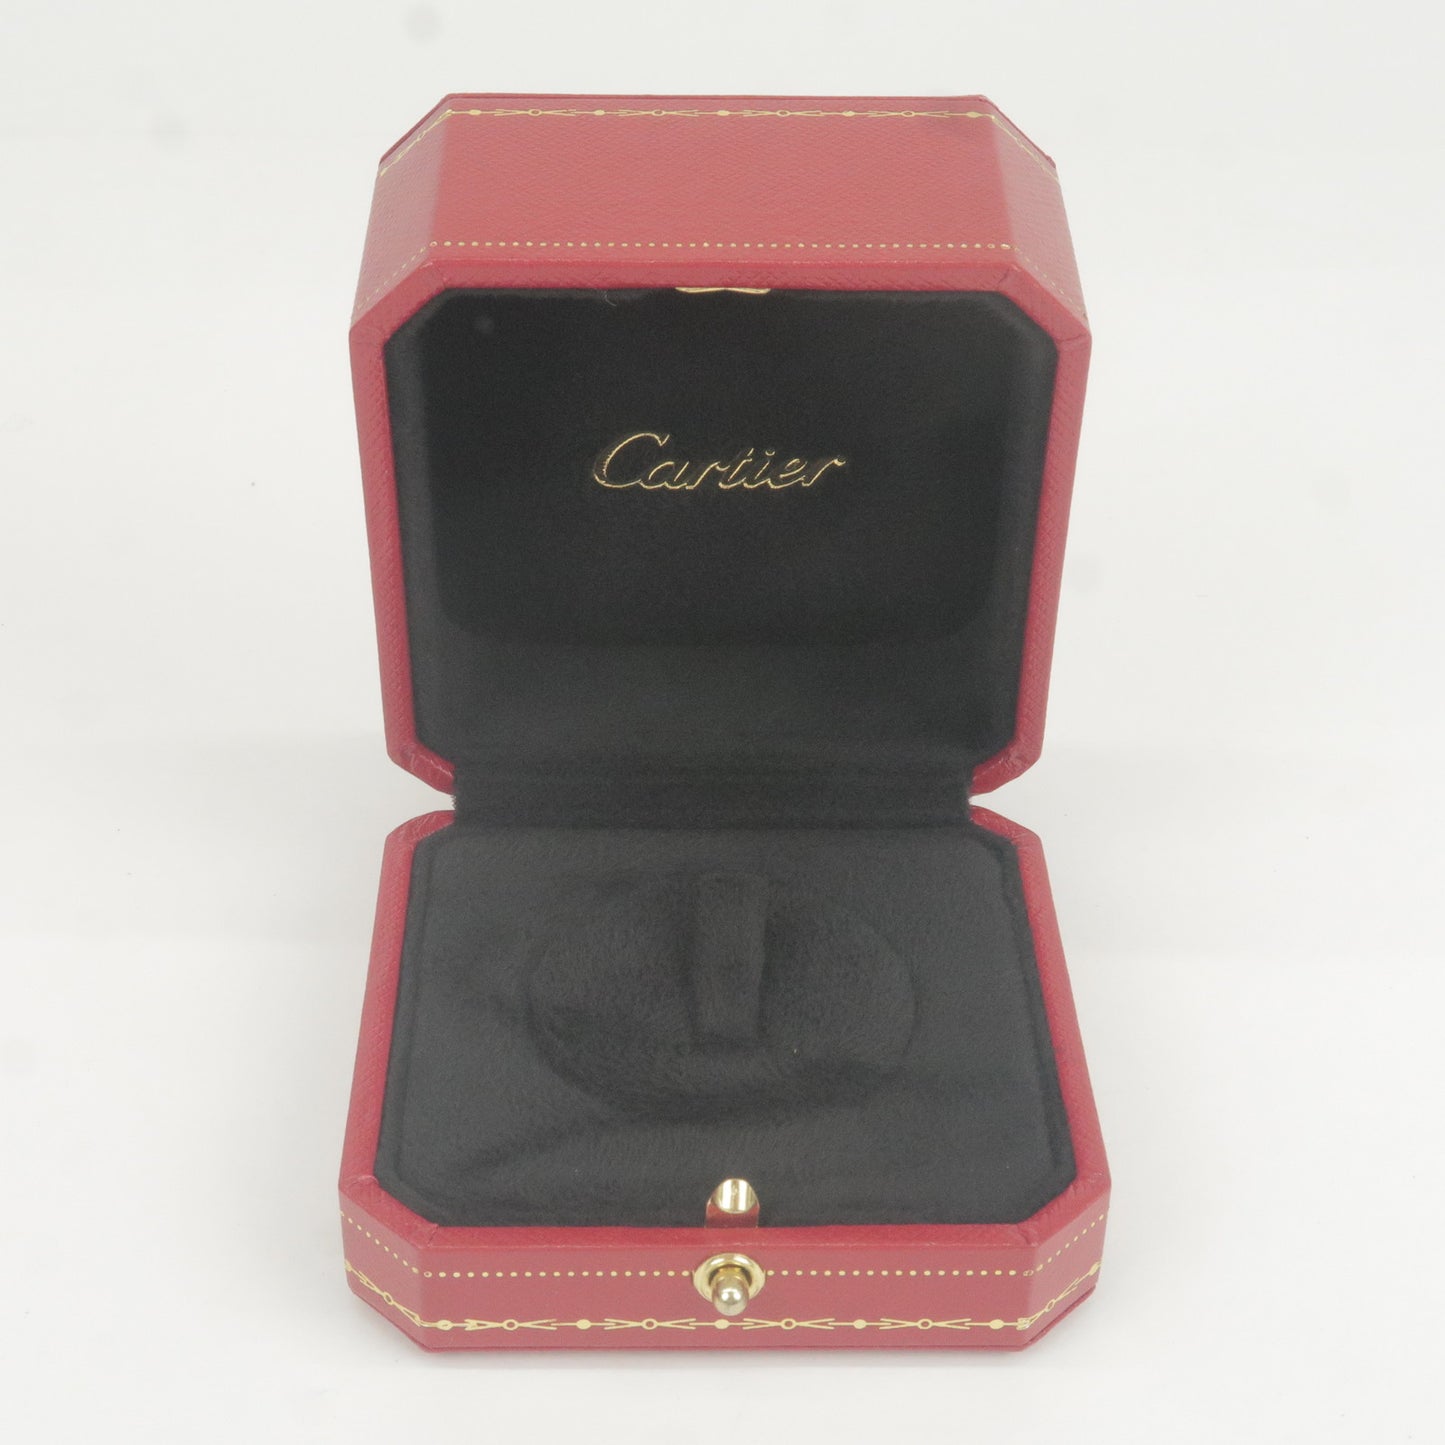 Cartier Set of 2 Ring Box Jewelry Box For Ring Red